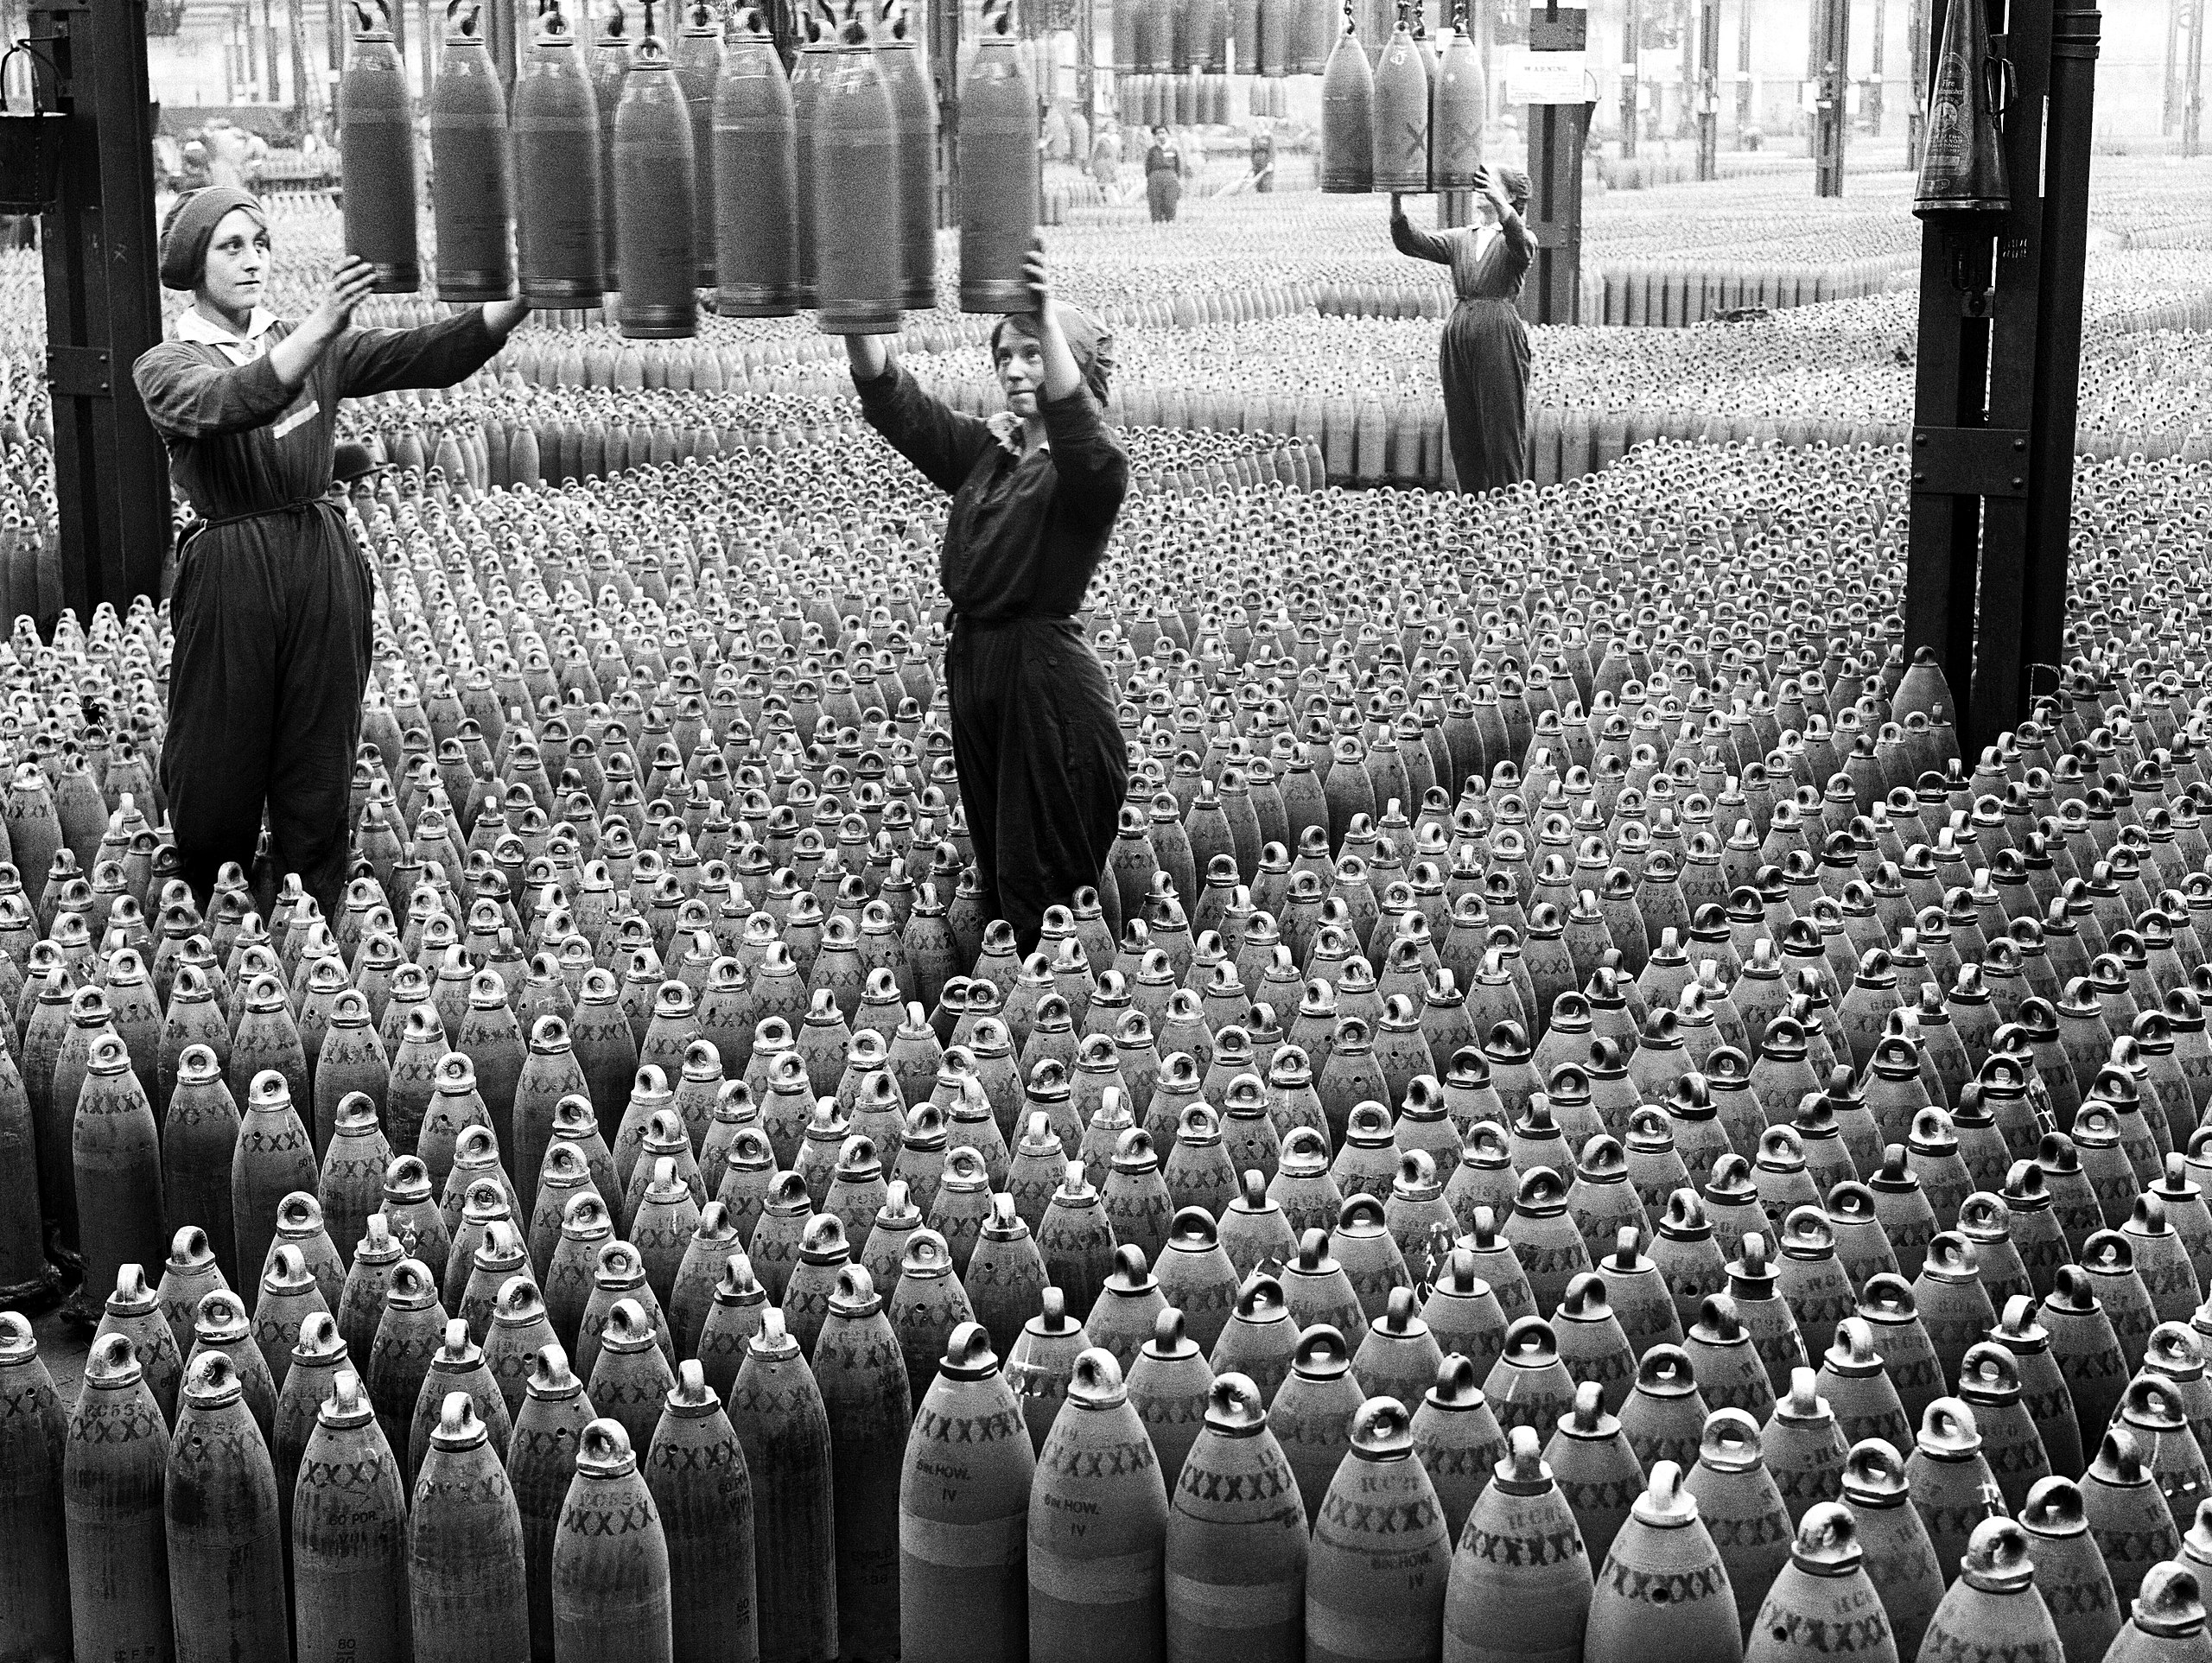 2560px-Women_workers_with_shells_in_Chilwell_filling_factory_1917_IWM_Q_30040.jpg